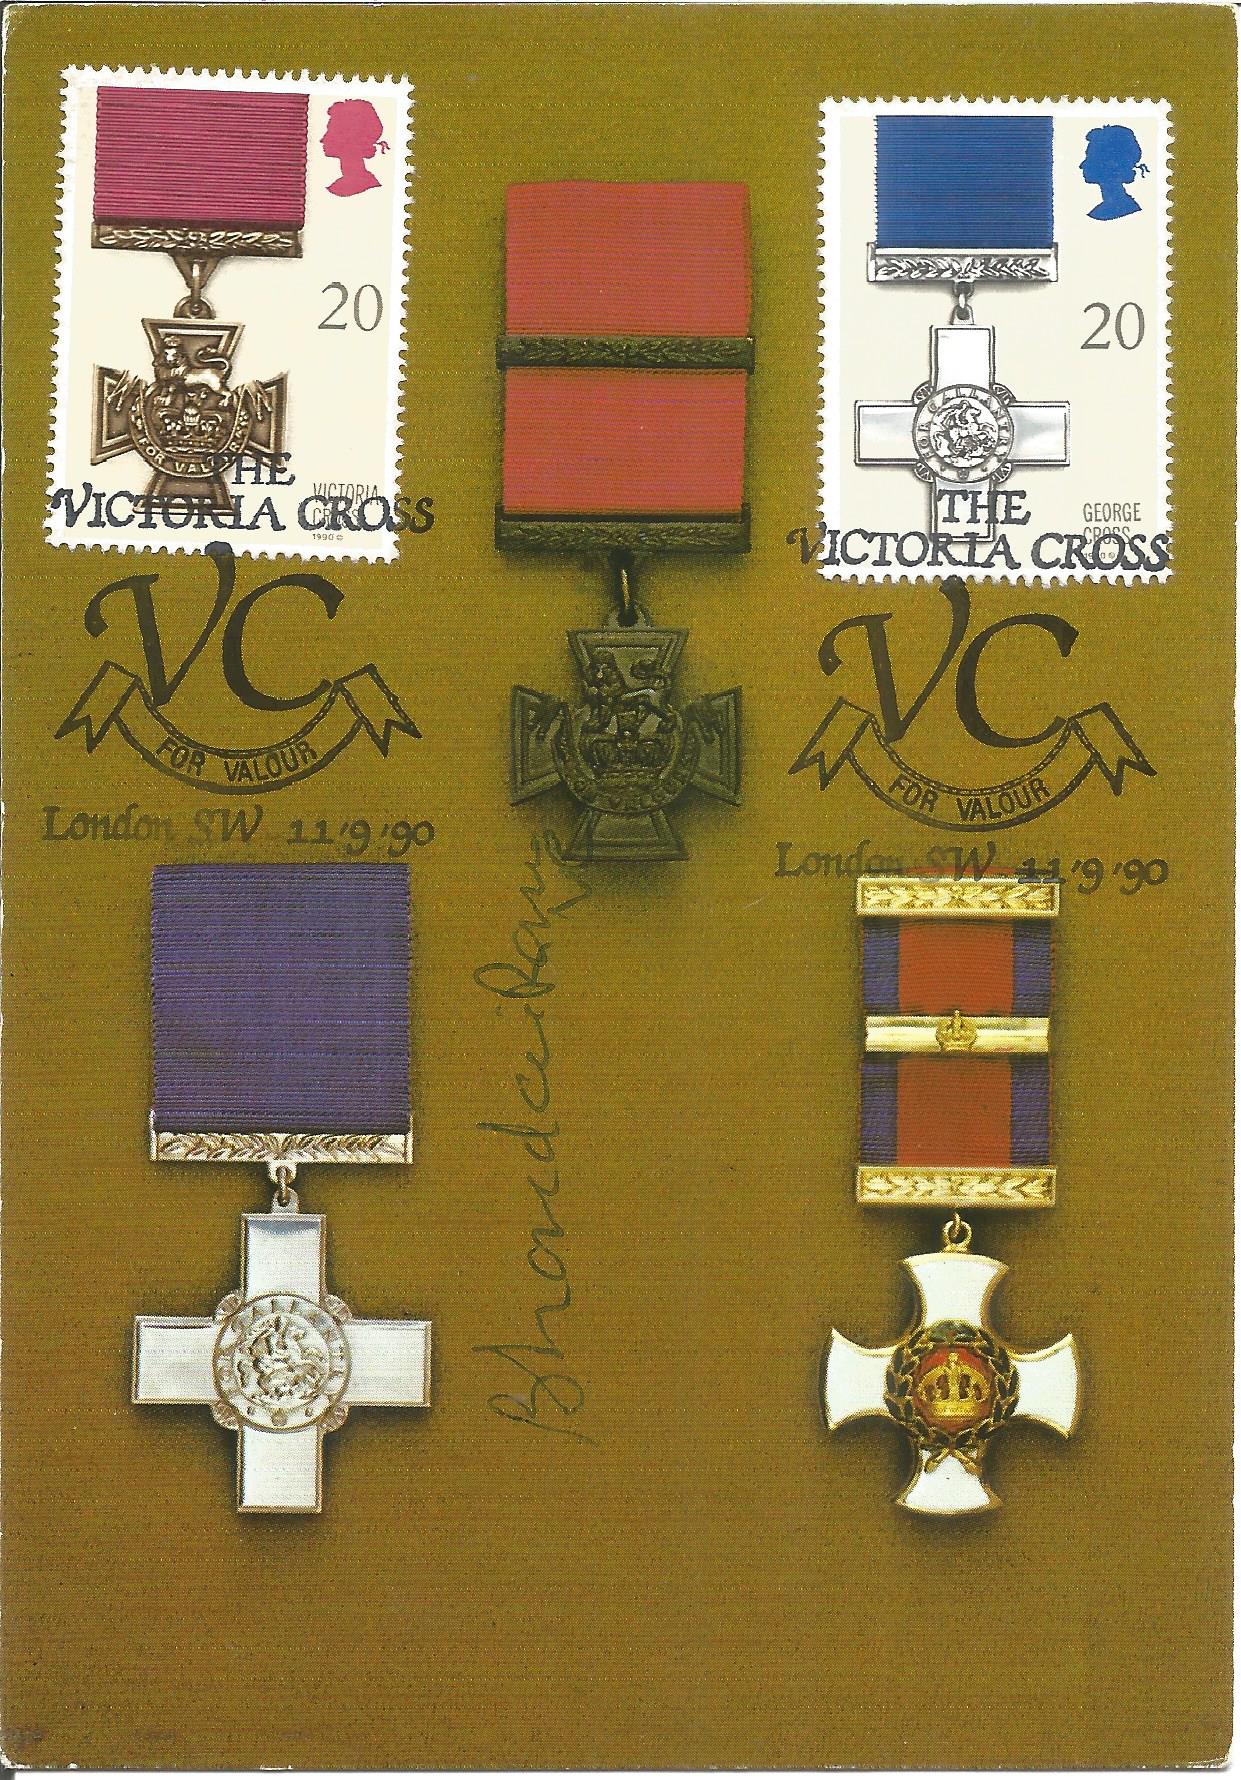 Awards for Gallantry signed postcard date stamp London S. W. 11-9-1990. with one signature. Good